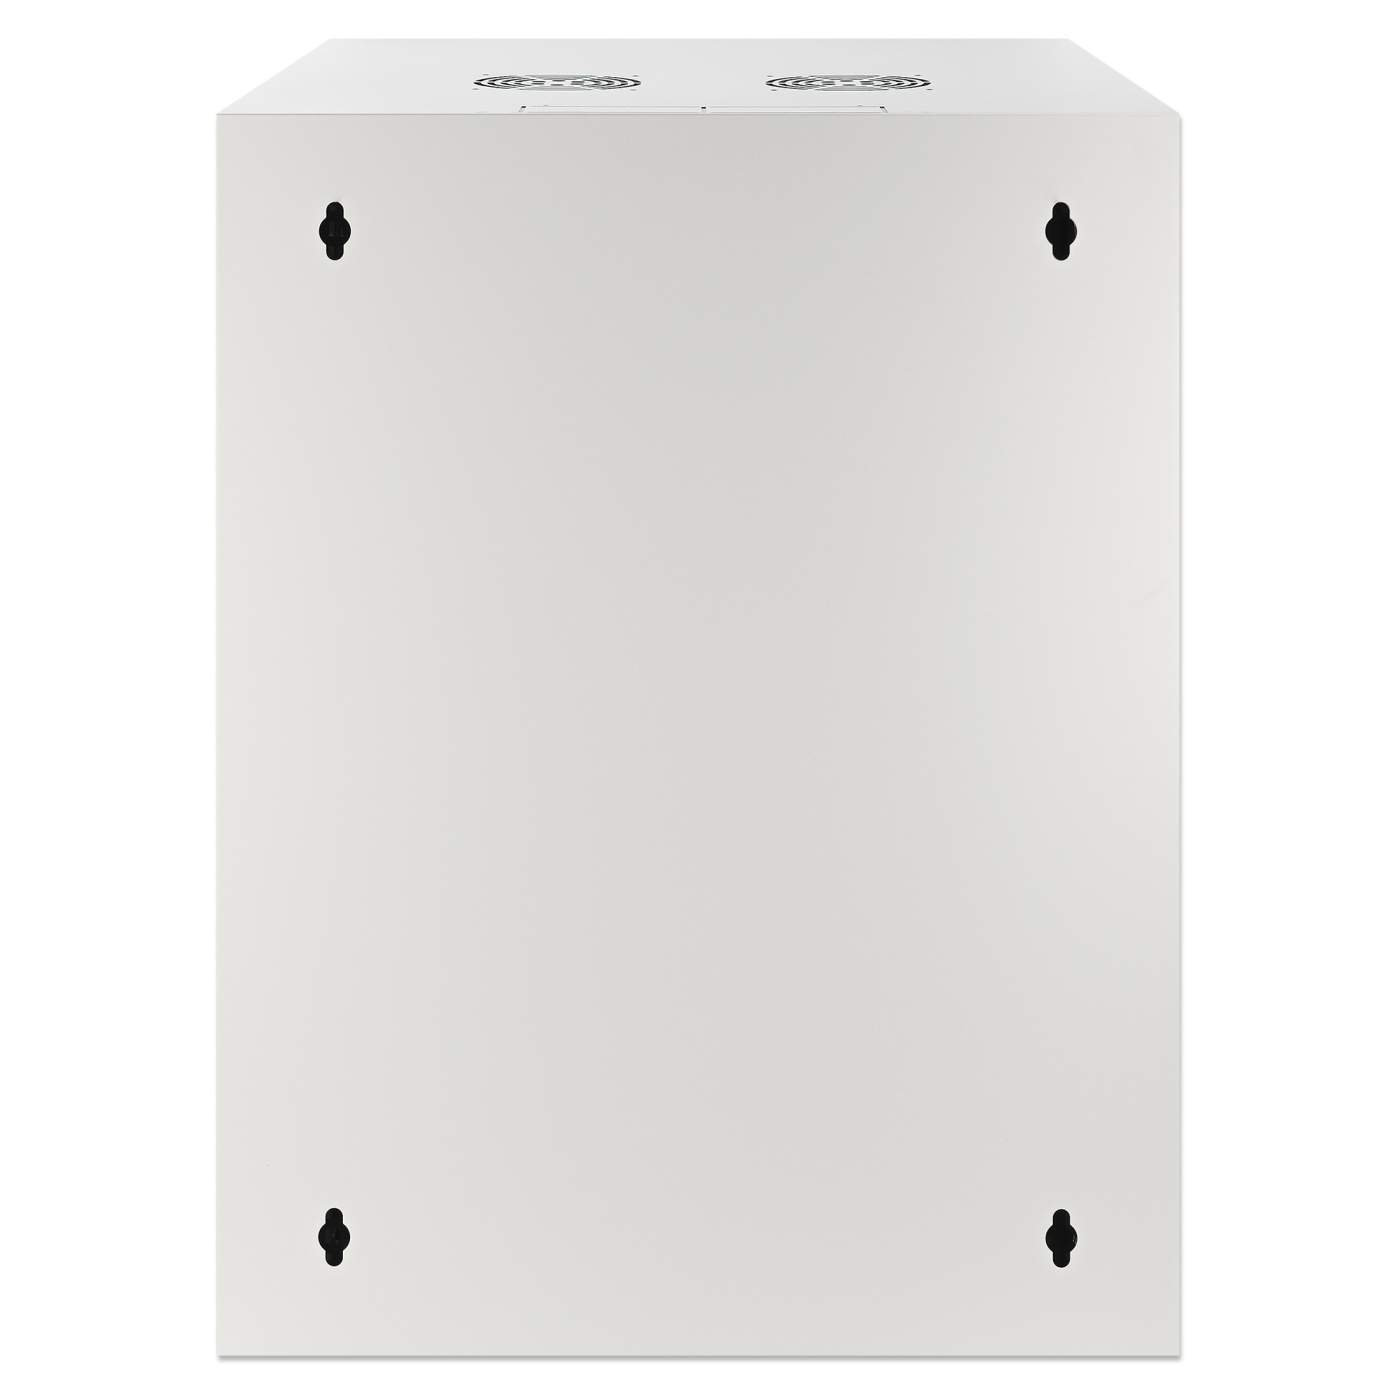 19" Double Section Wallmount Cabinet Image 4